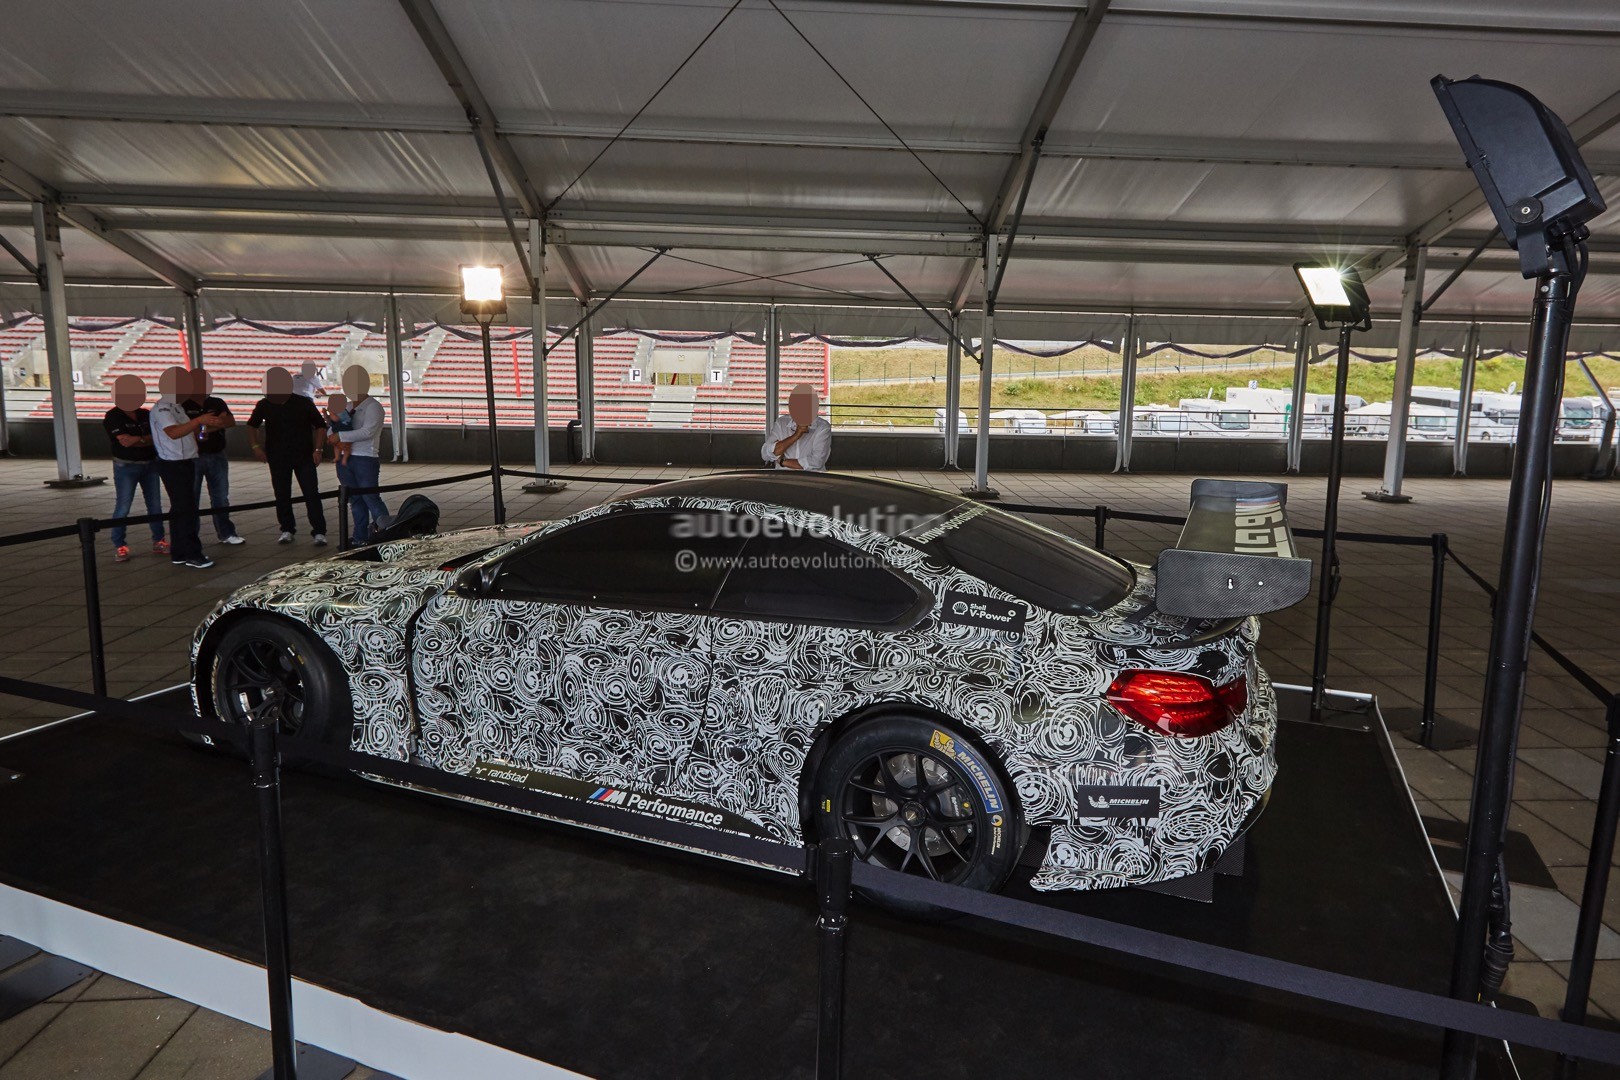 2016-bmw-m6-gt3-caught-on-camera-at-the-spa-francorchamps-24-hour-race-photo-gallery_15